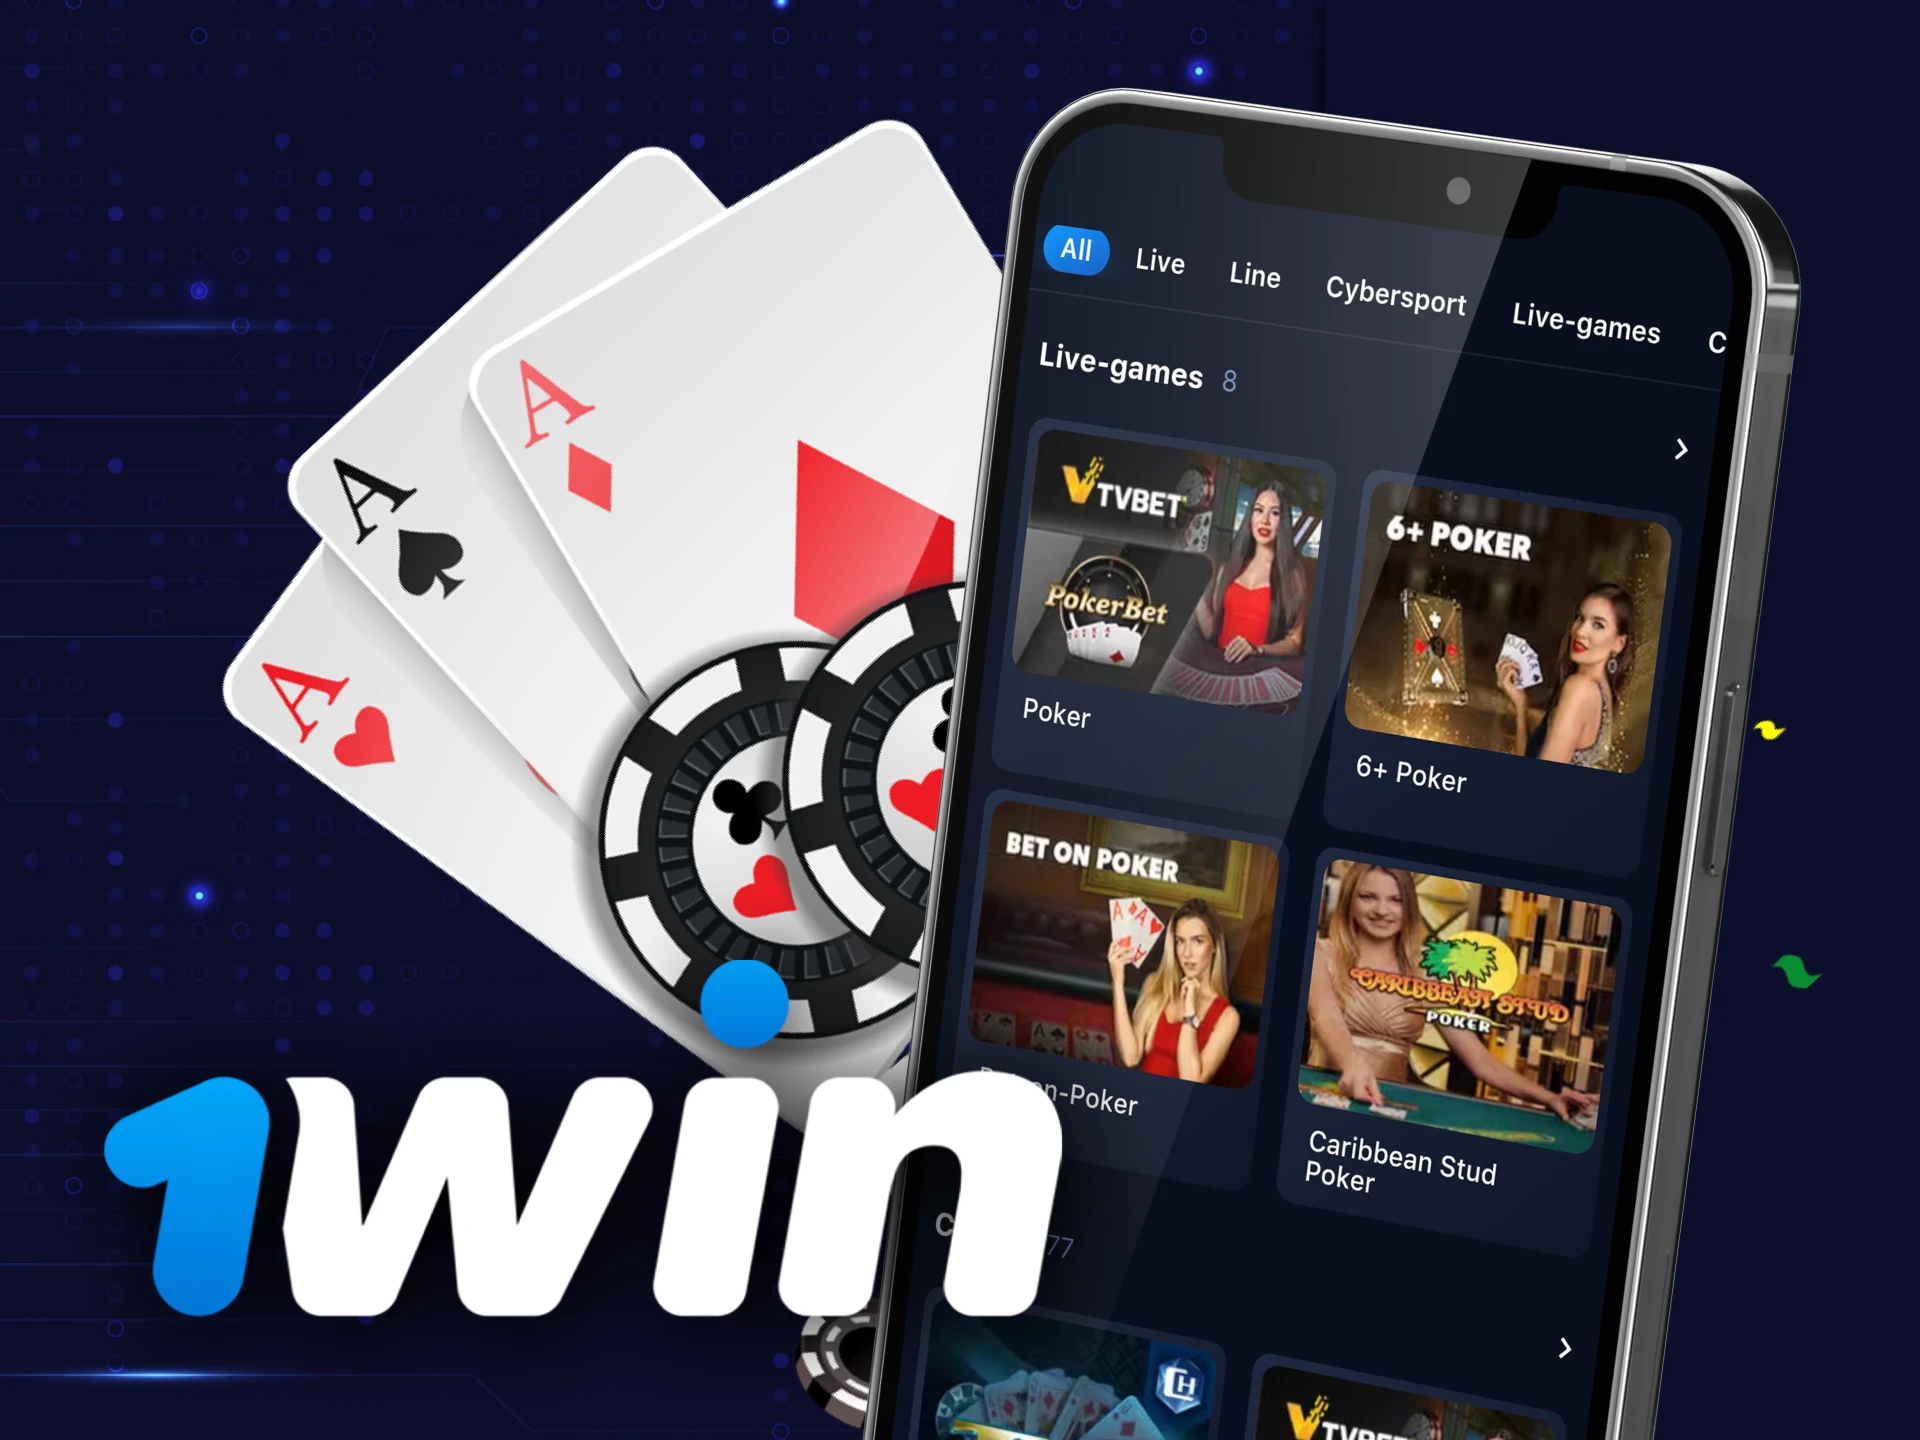 You can install the 1win iOS app on your Apple device.